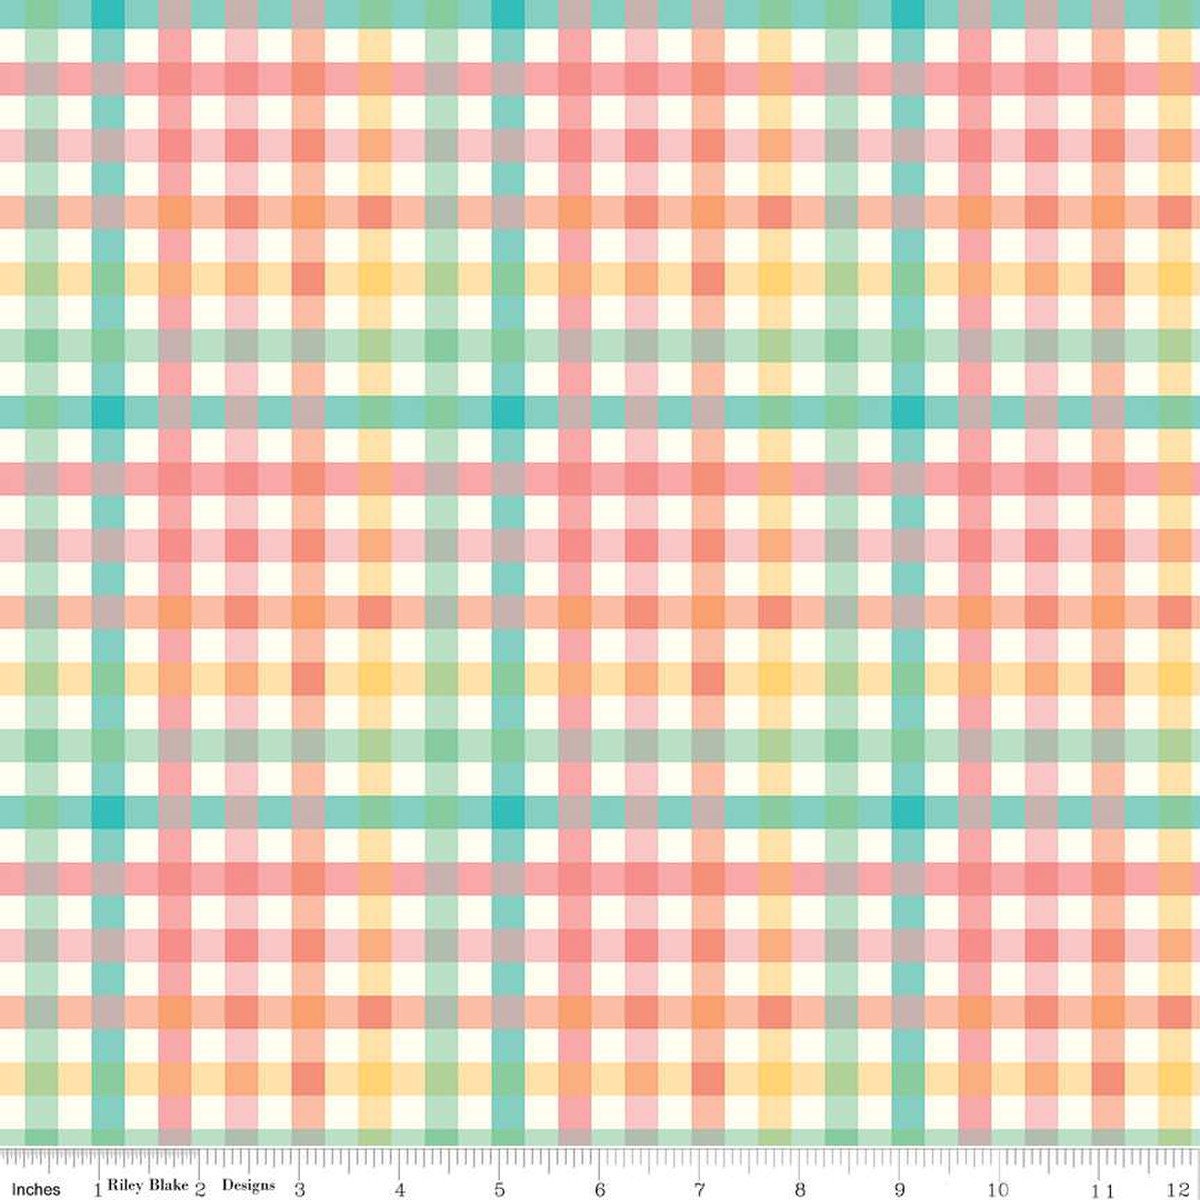 Gingham Cottage PRINTED Gingham C13014 Multi - Riley Blake Designs -  Multiple Colors Cream Checks Check - Quilting Cotton Fabric